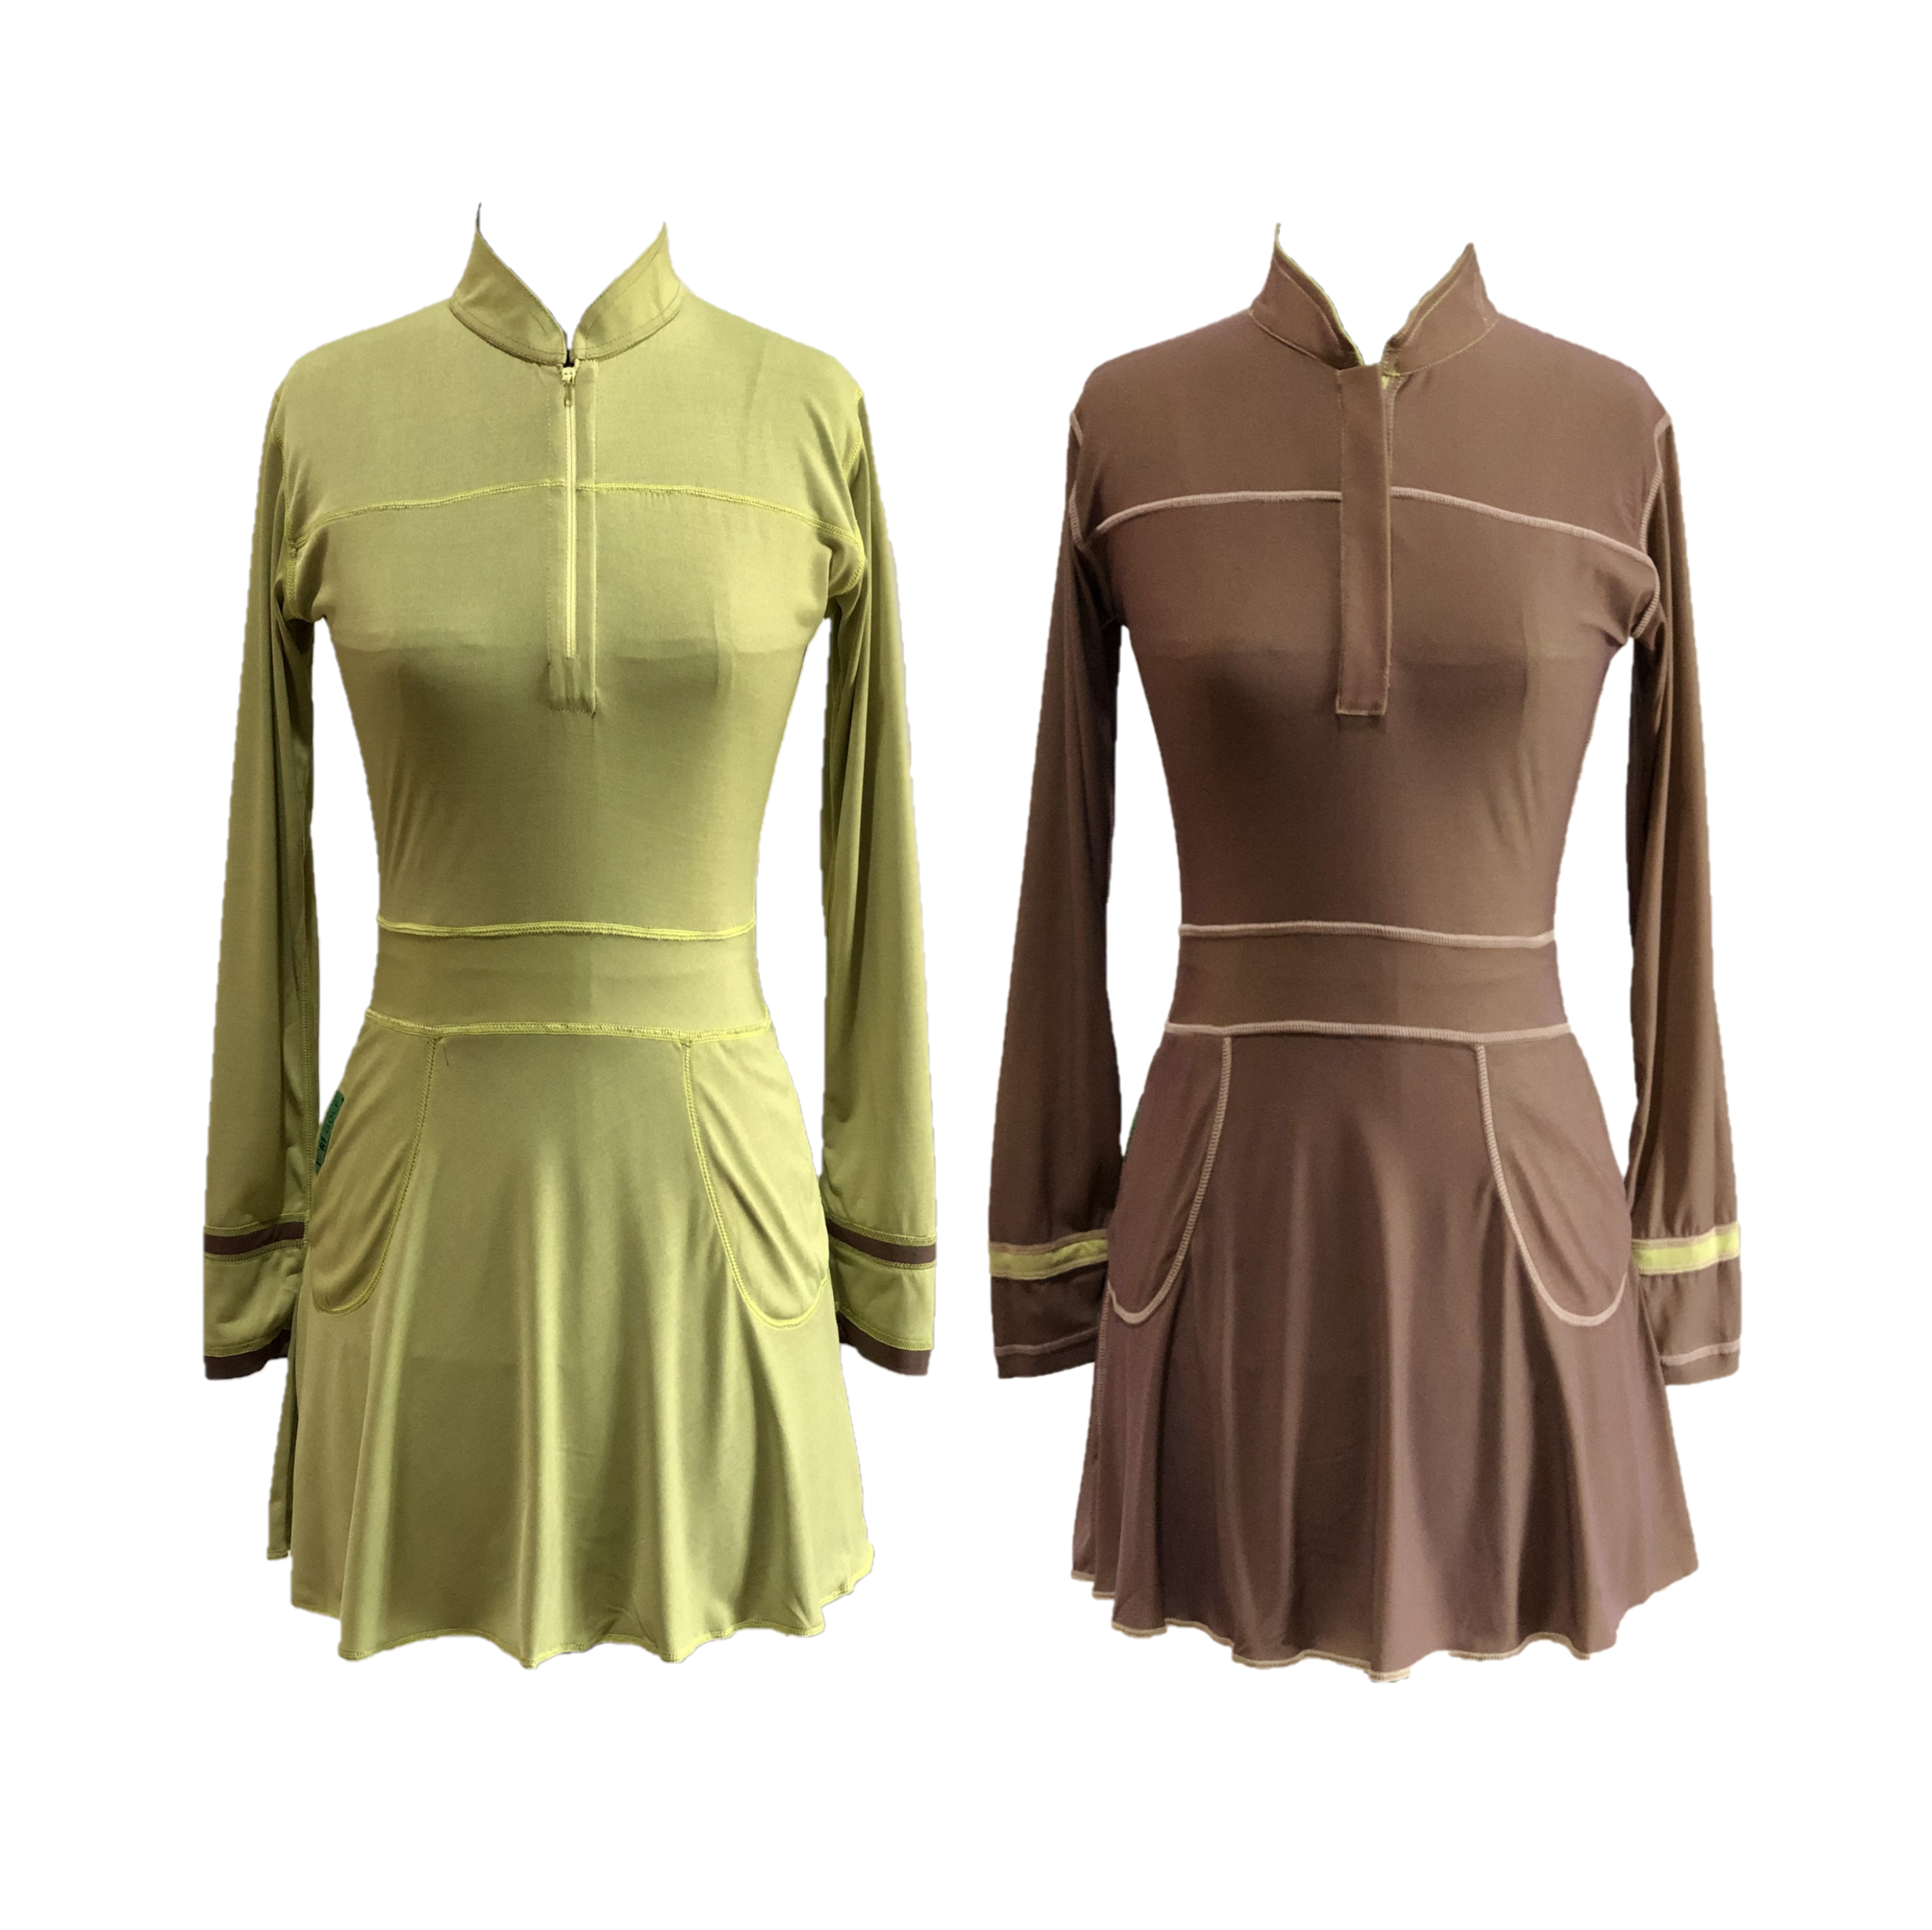 RGD-023B || Golf Dress Reversible Long Sleeve One Side Kiwi Green with Featured Contrasting Espresso Brown Overlocked Stitched Seams Other Side Espresso Brown  with Featured Contrasting Kiwi Green Overlocked Stitched Seams Mandarin Collar  Zip Fastened, 2 Side Entry Patch Pockets